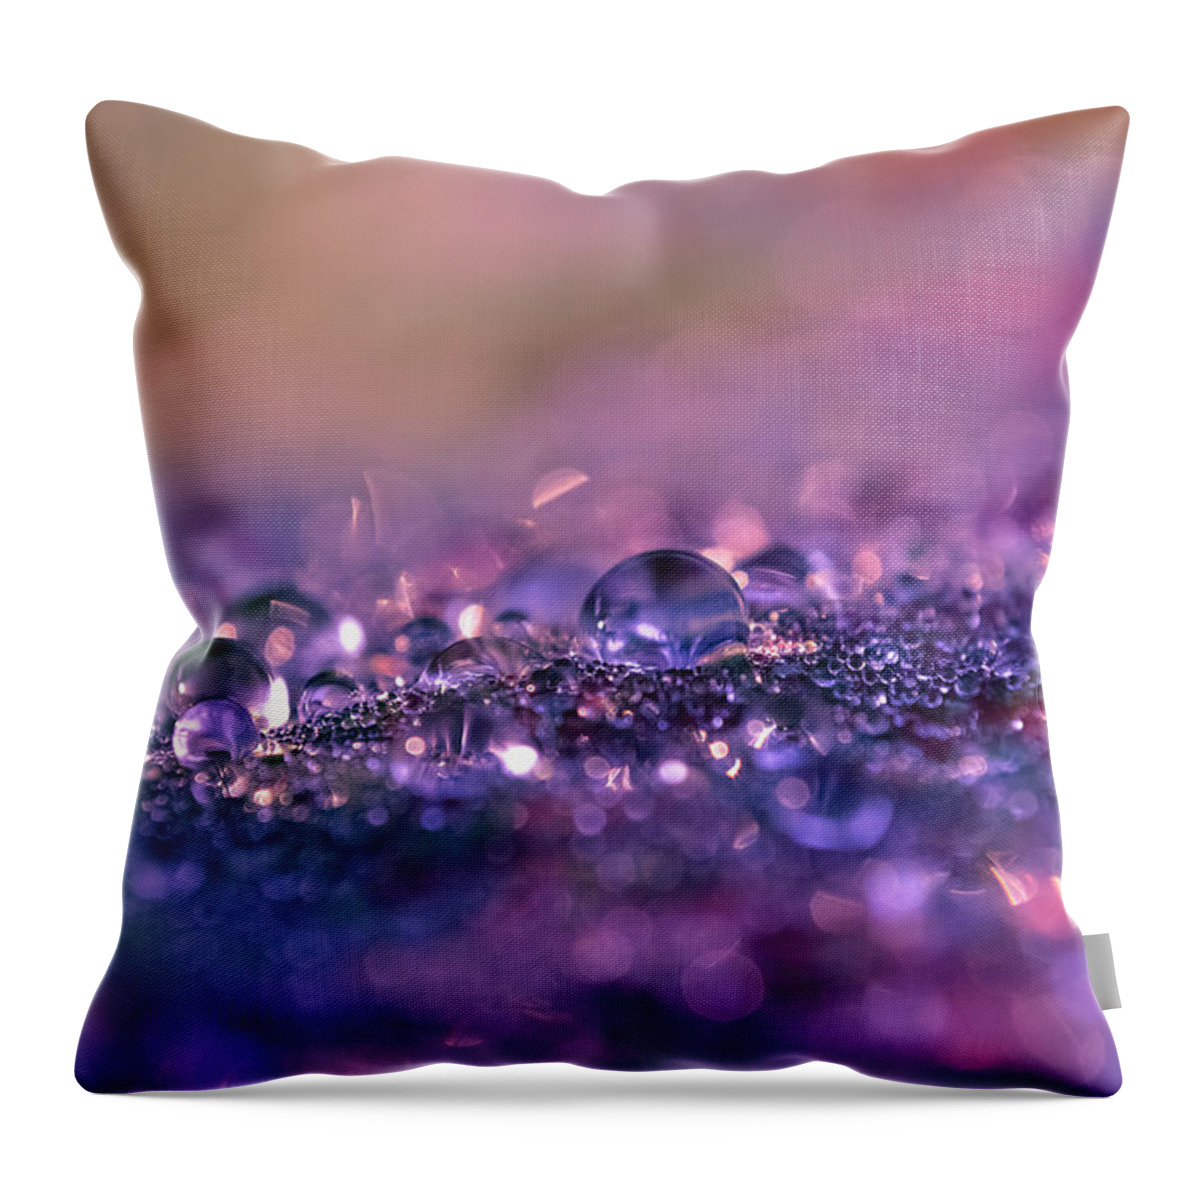 Prince Throw Pillow featuring the photograph Goodnight Sweet Prince by Melanie Moraga